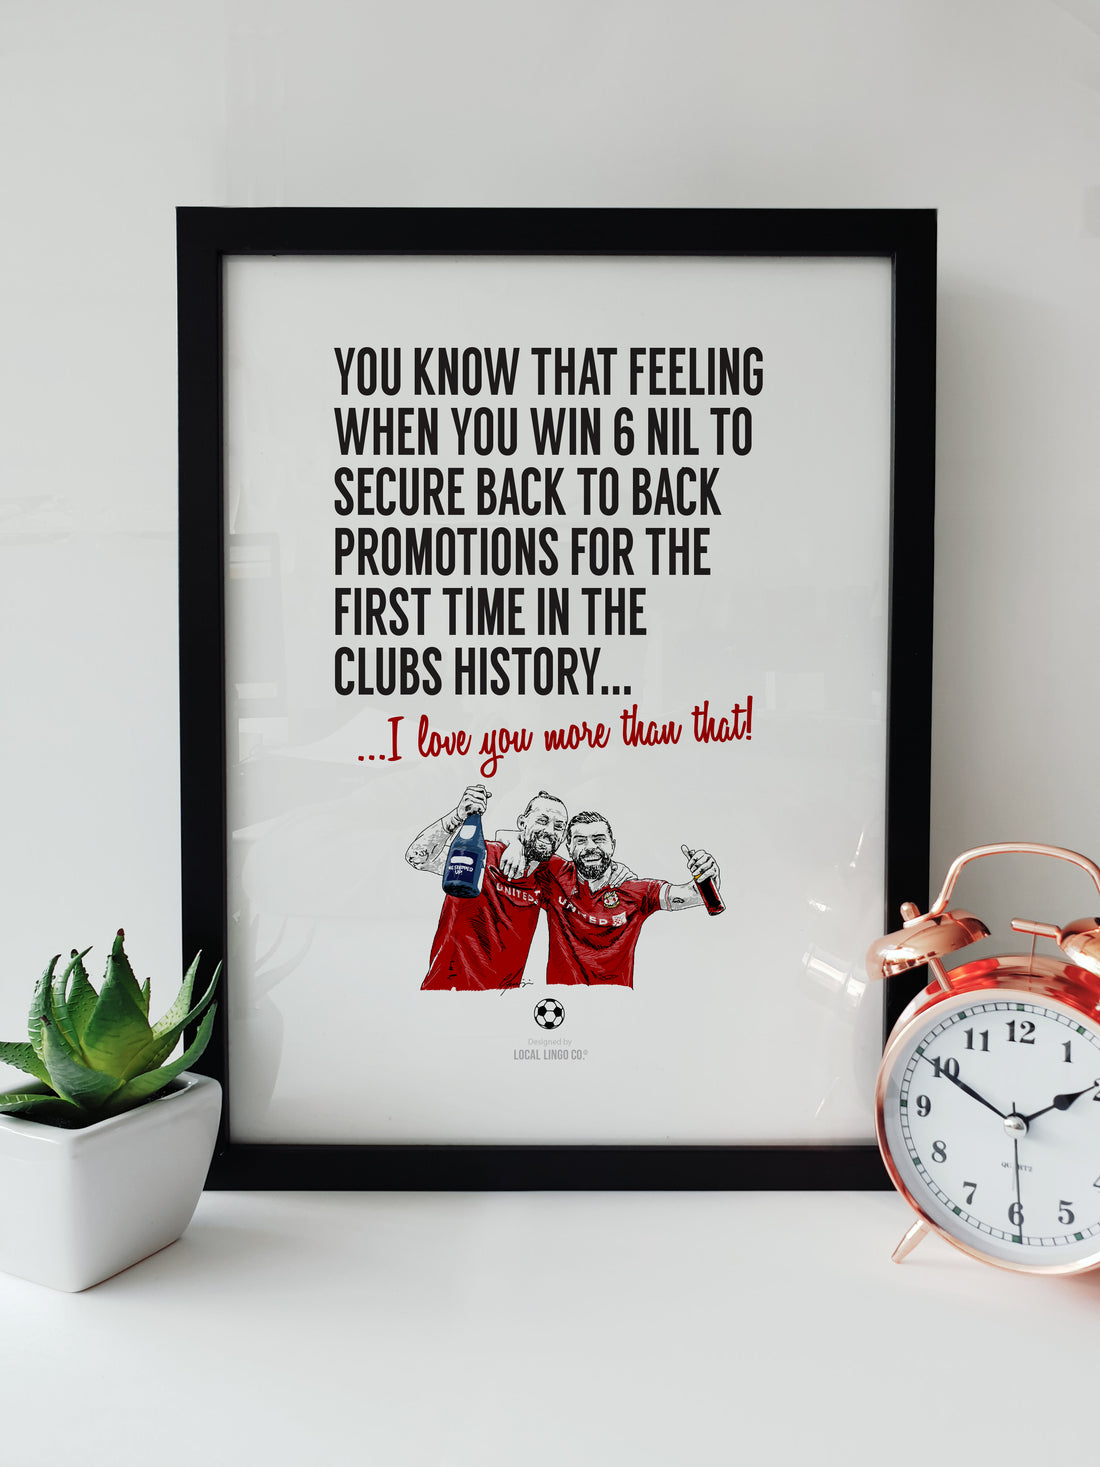 Local Lingo's Wrexham AFC celebration print featuring the team's historic 6-0 victory, capturing the essence of the club's spirit.